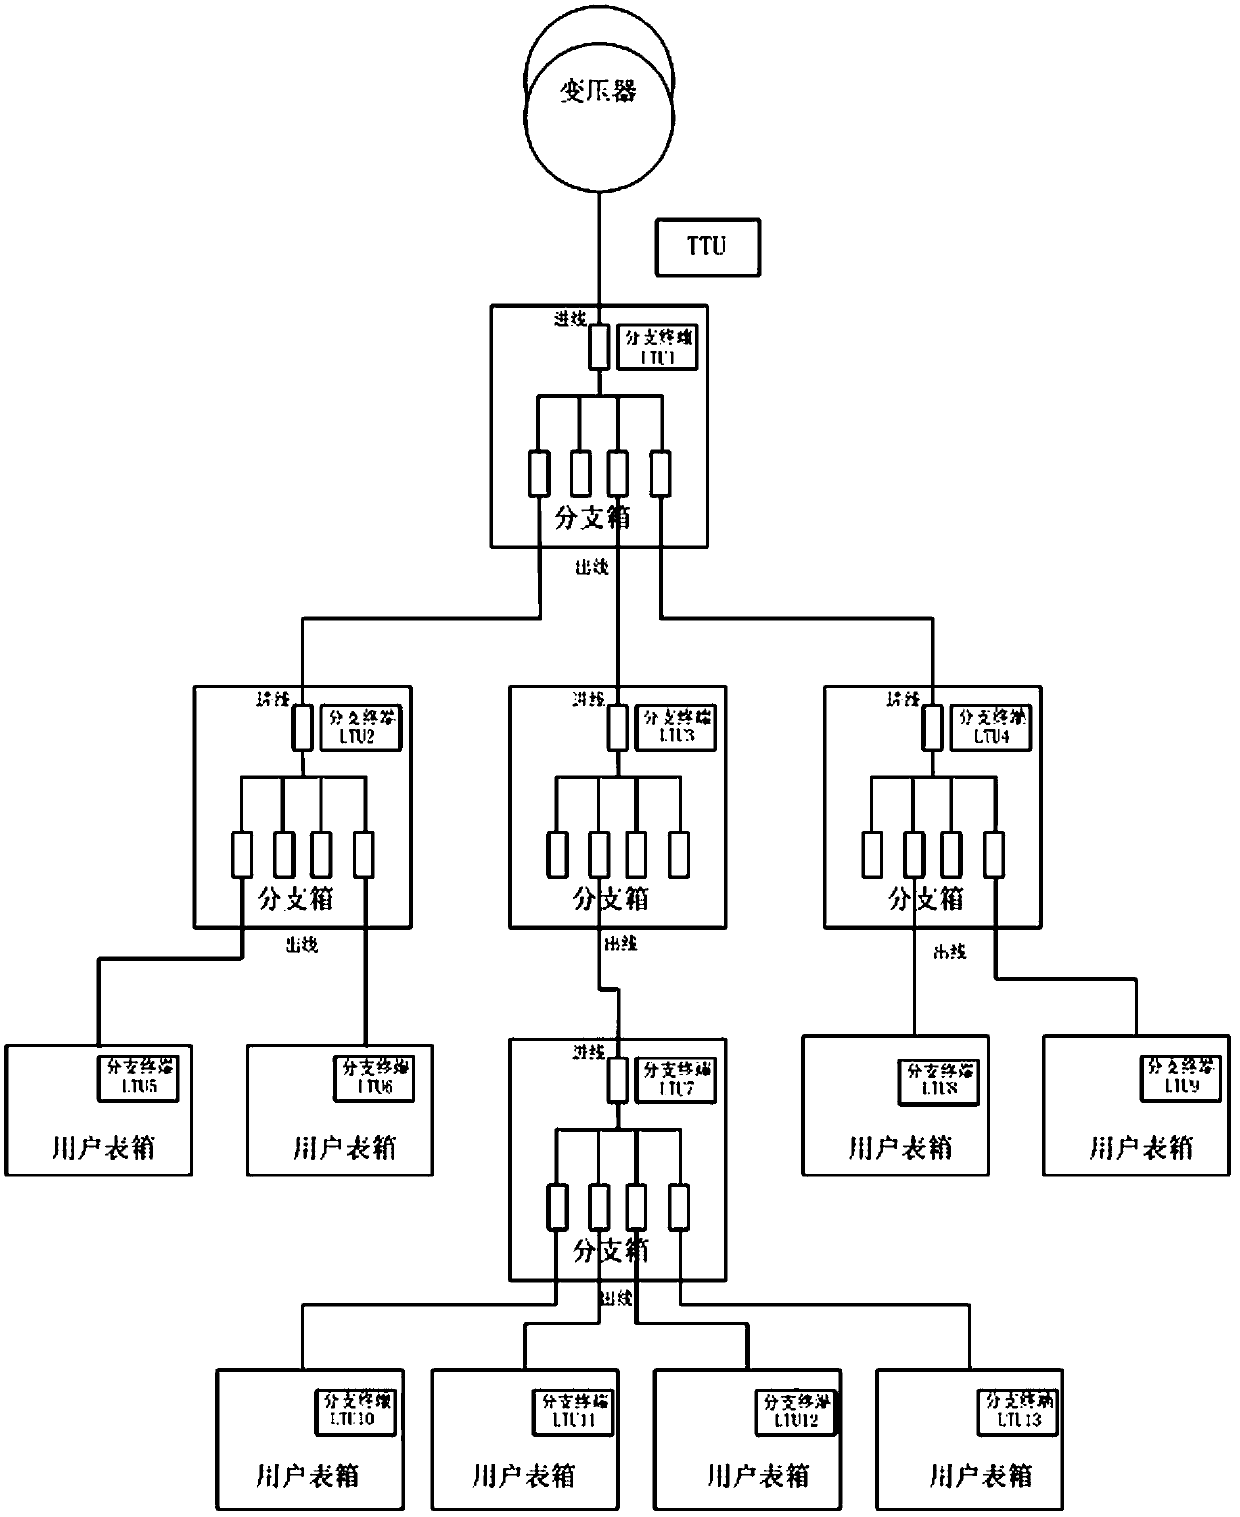 Automatic identification method for topology of low-voltage transformer area